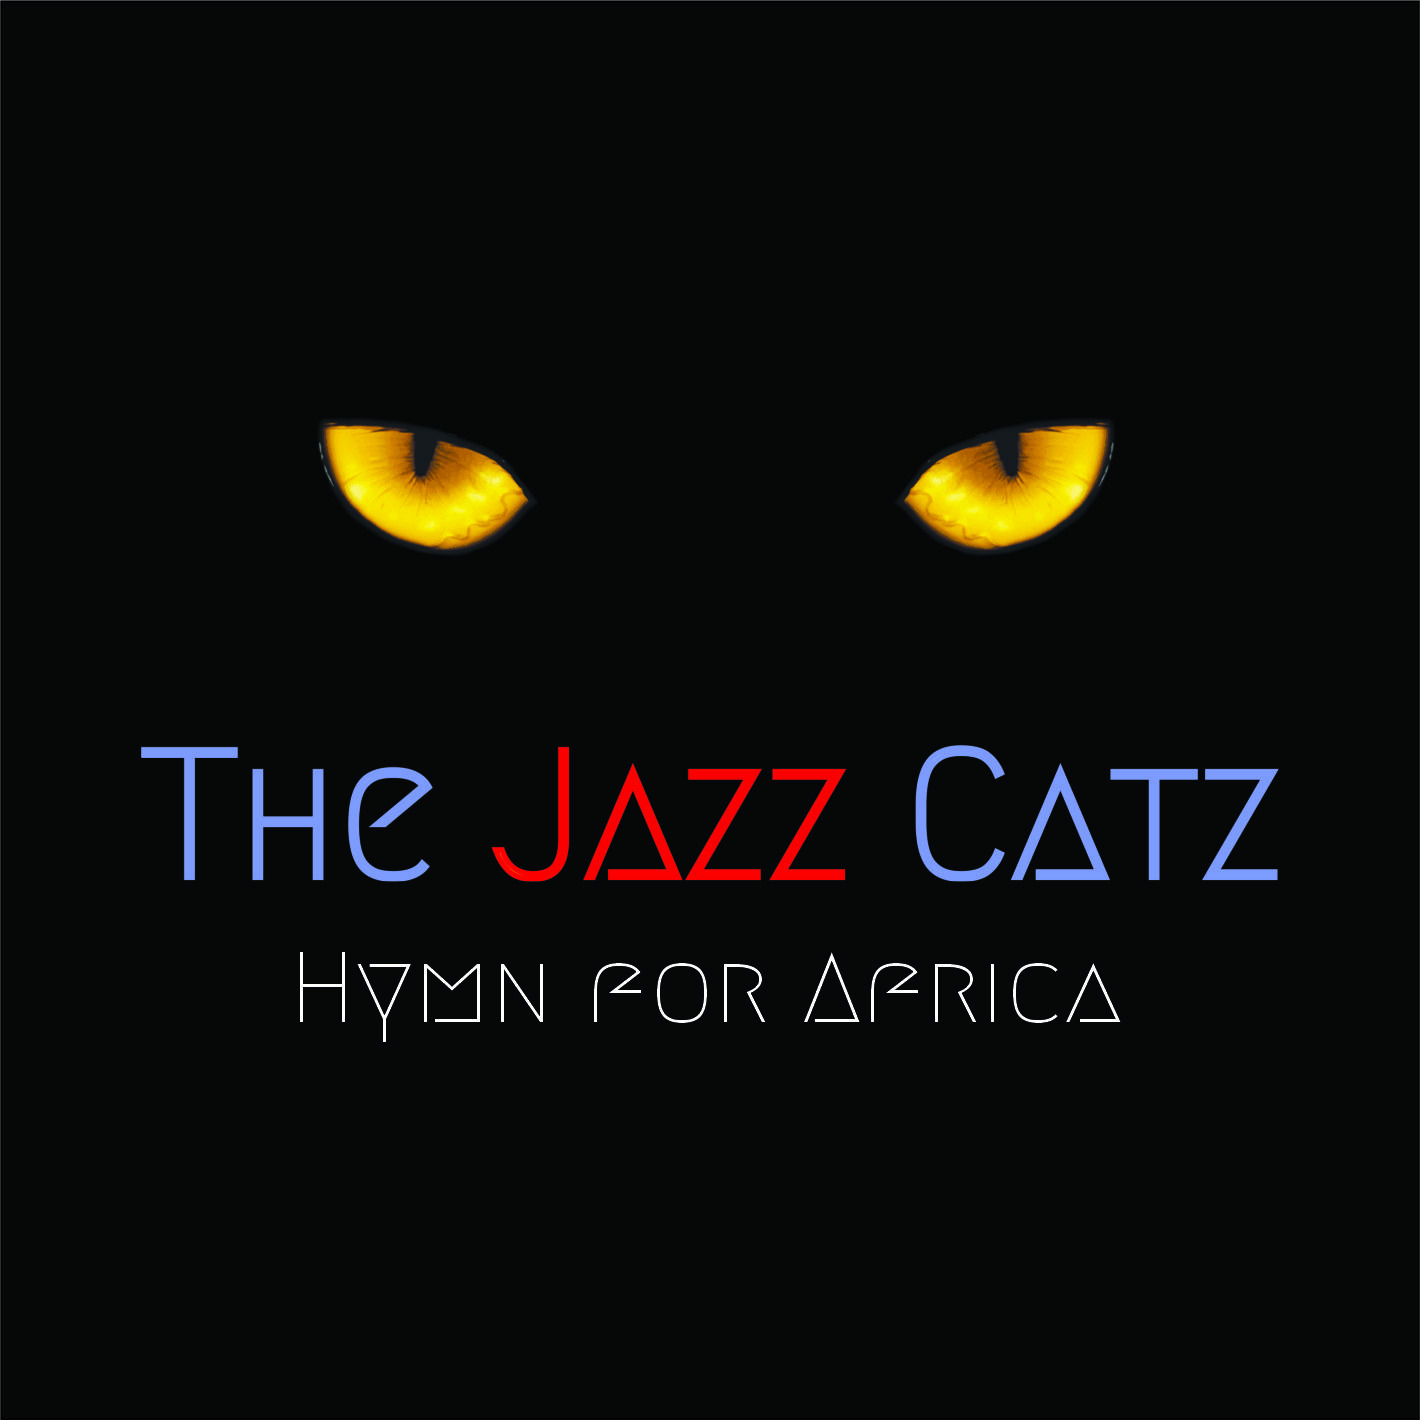 Re-defining Soul Music with Relatable and Profound Music - The Jazz Catz Drop New Album "Hymn for Africa"